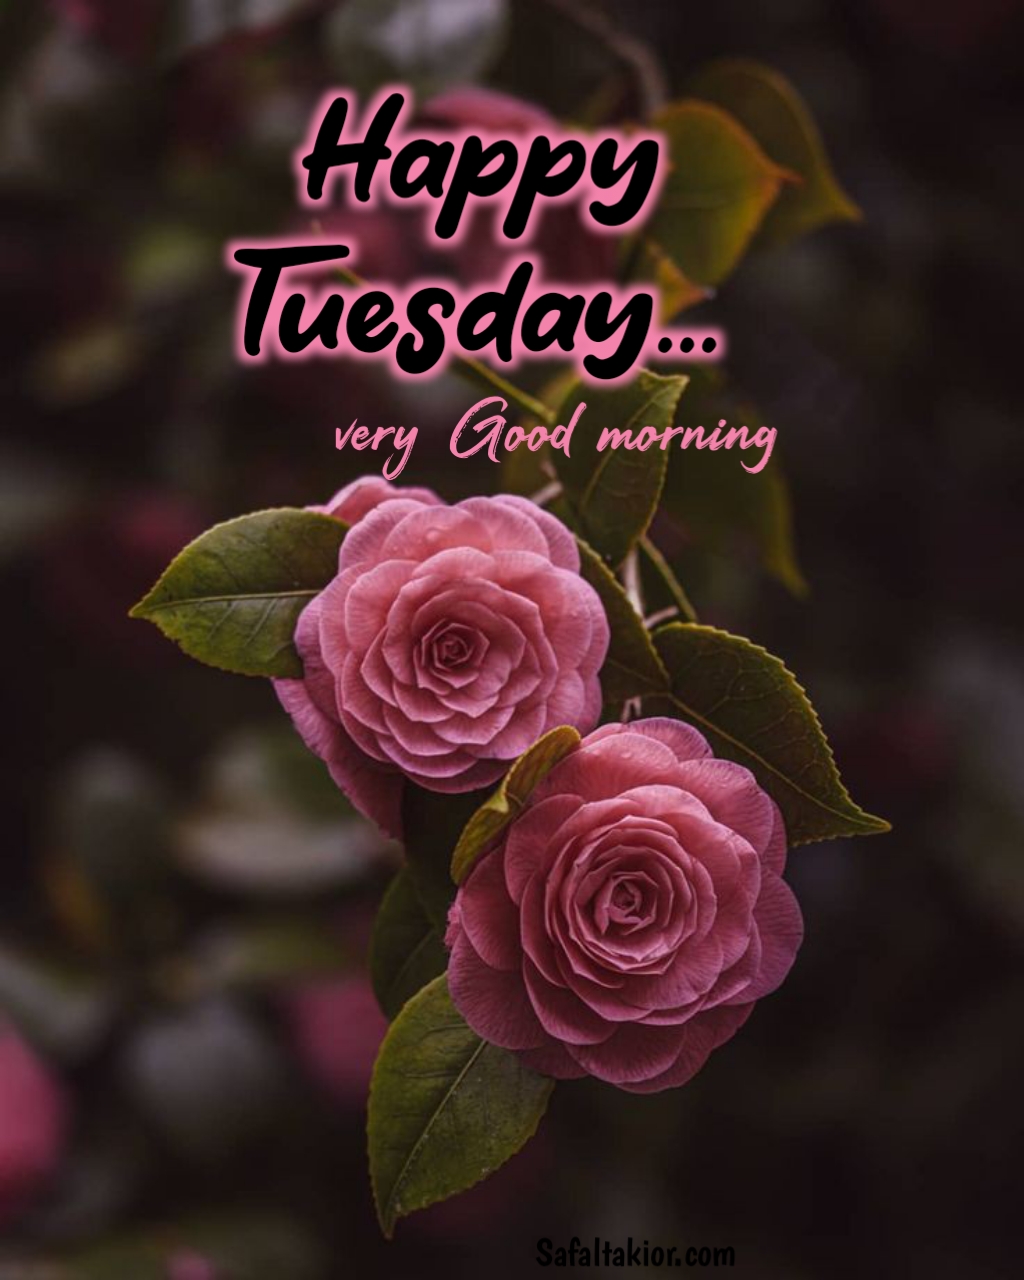 happy tuesday images for whatsapp